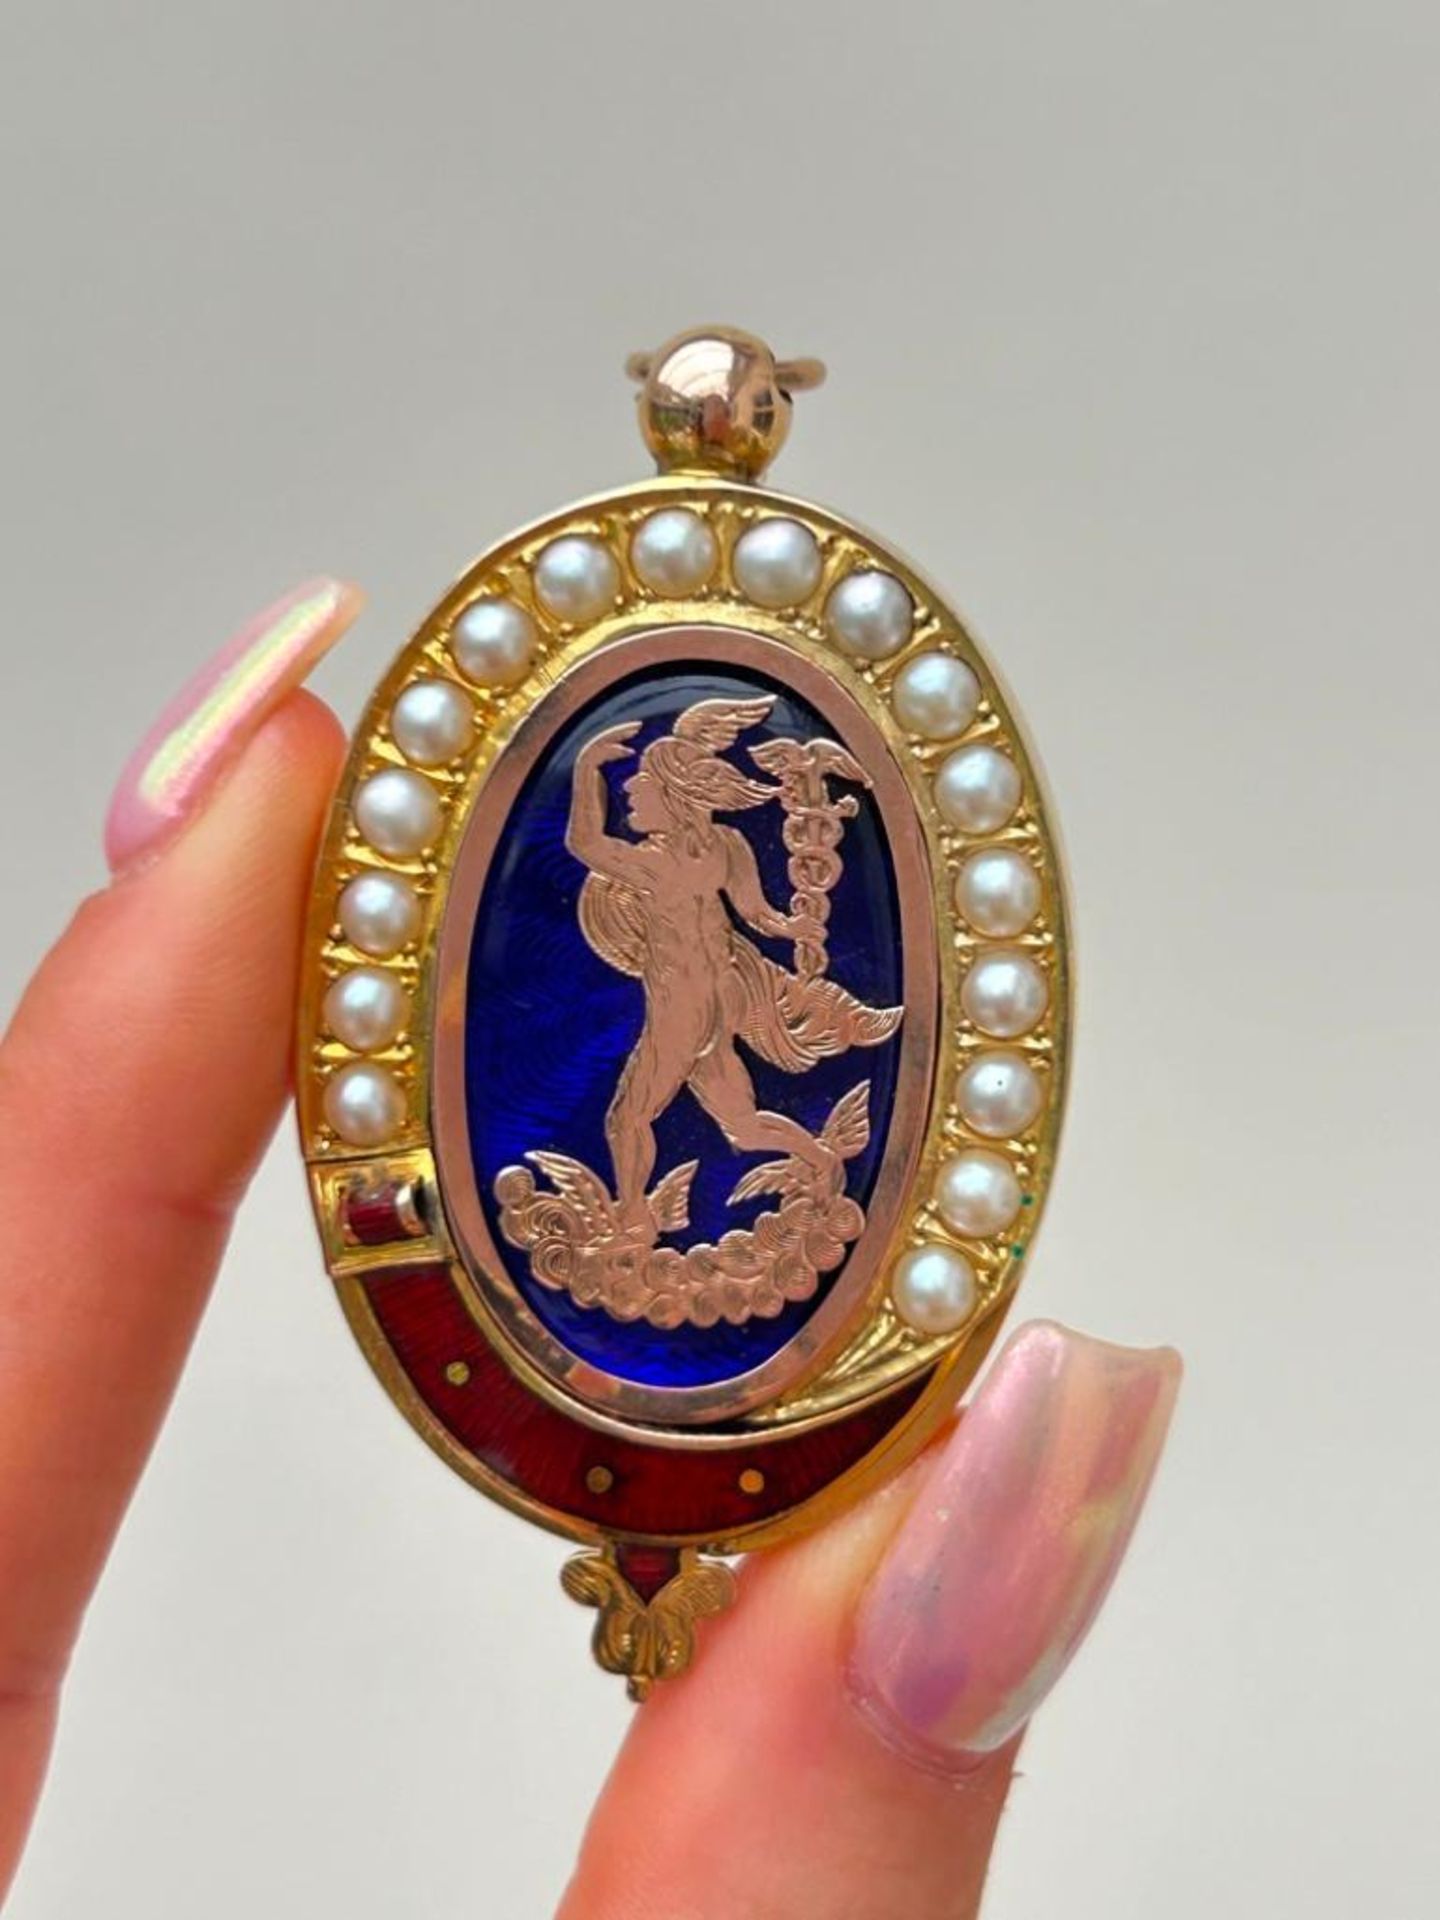 Rare Antique Gold Pearl Bristol Blue Glass and Enamel Large Pendant - Image 3 of 6